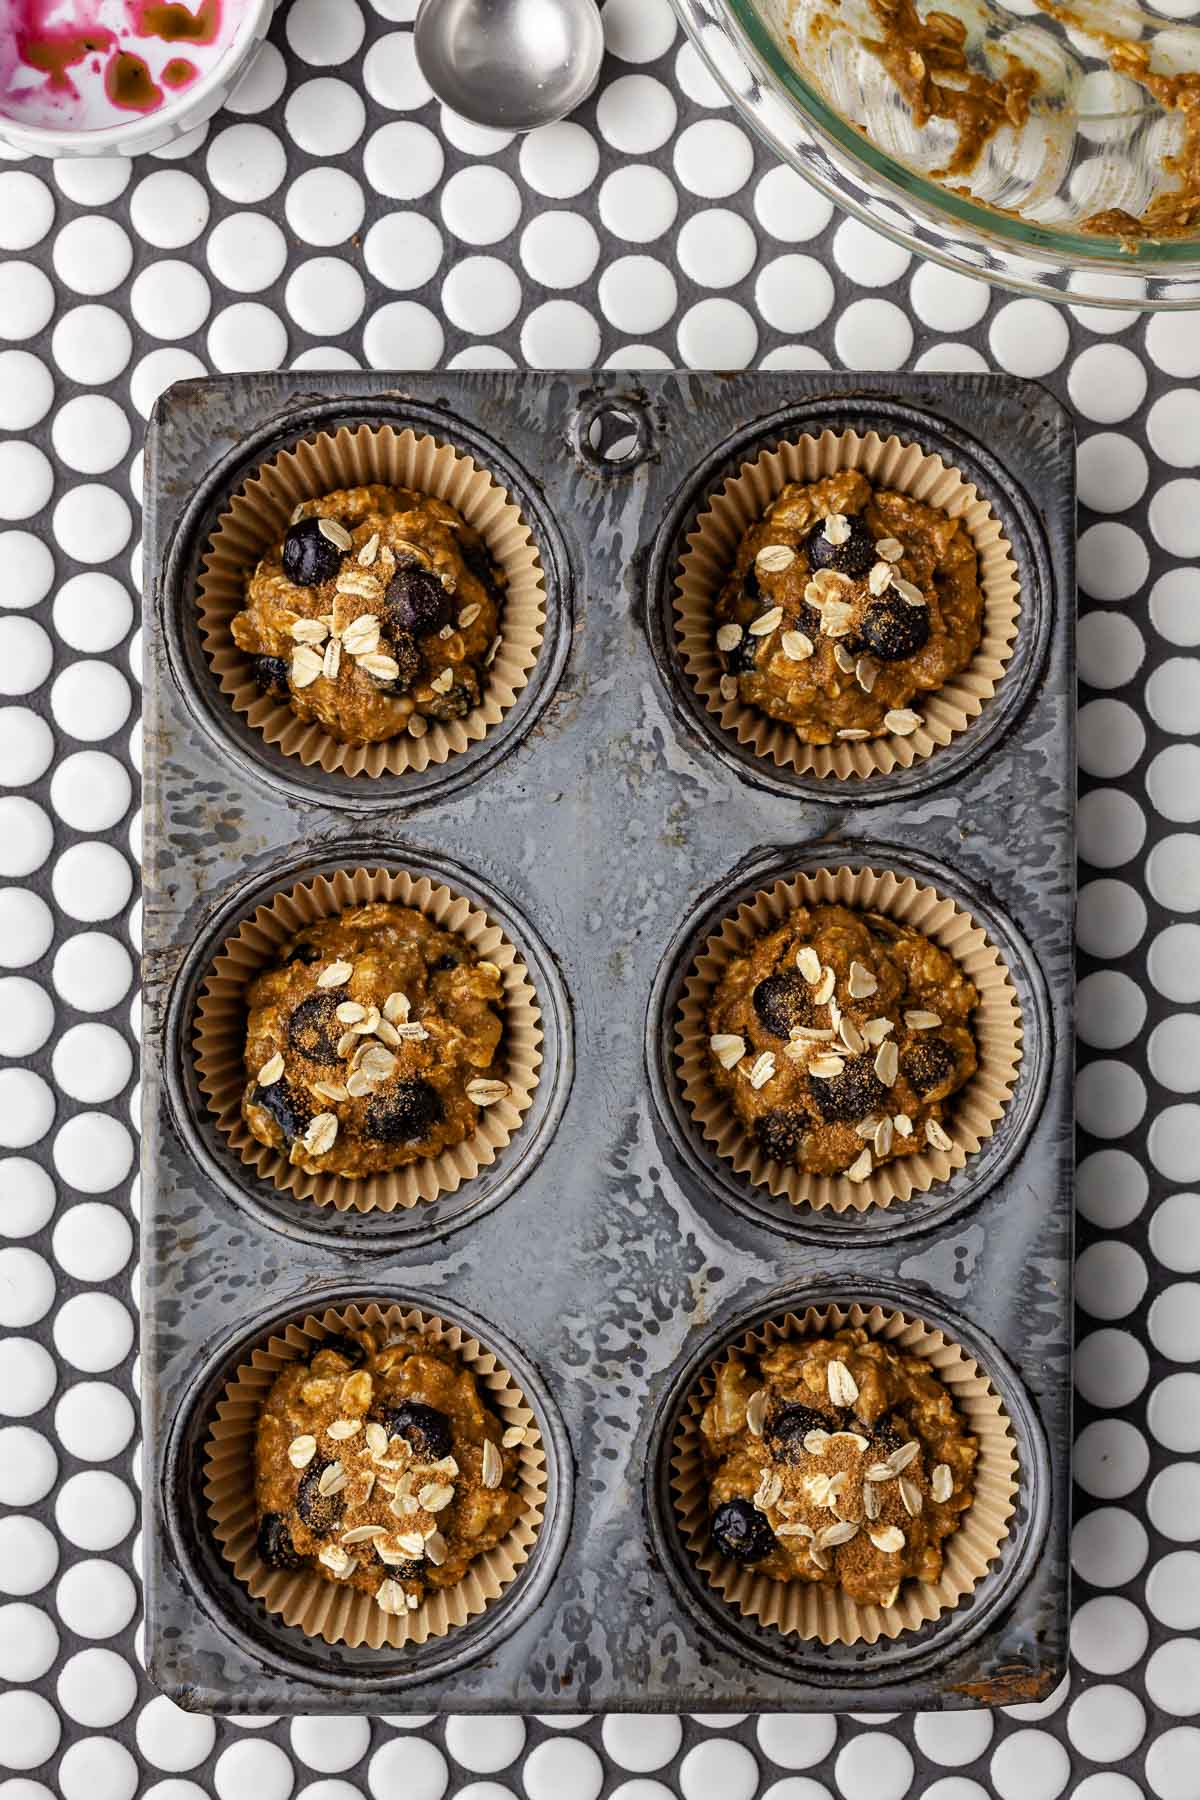 Muffin tin holding banana blueberry oatmeal muffin batter with added blueberries, rolled oats, and coconut sugar on top.